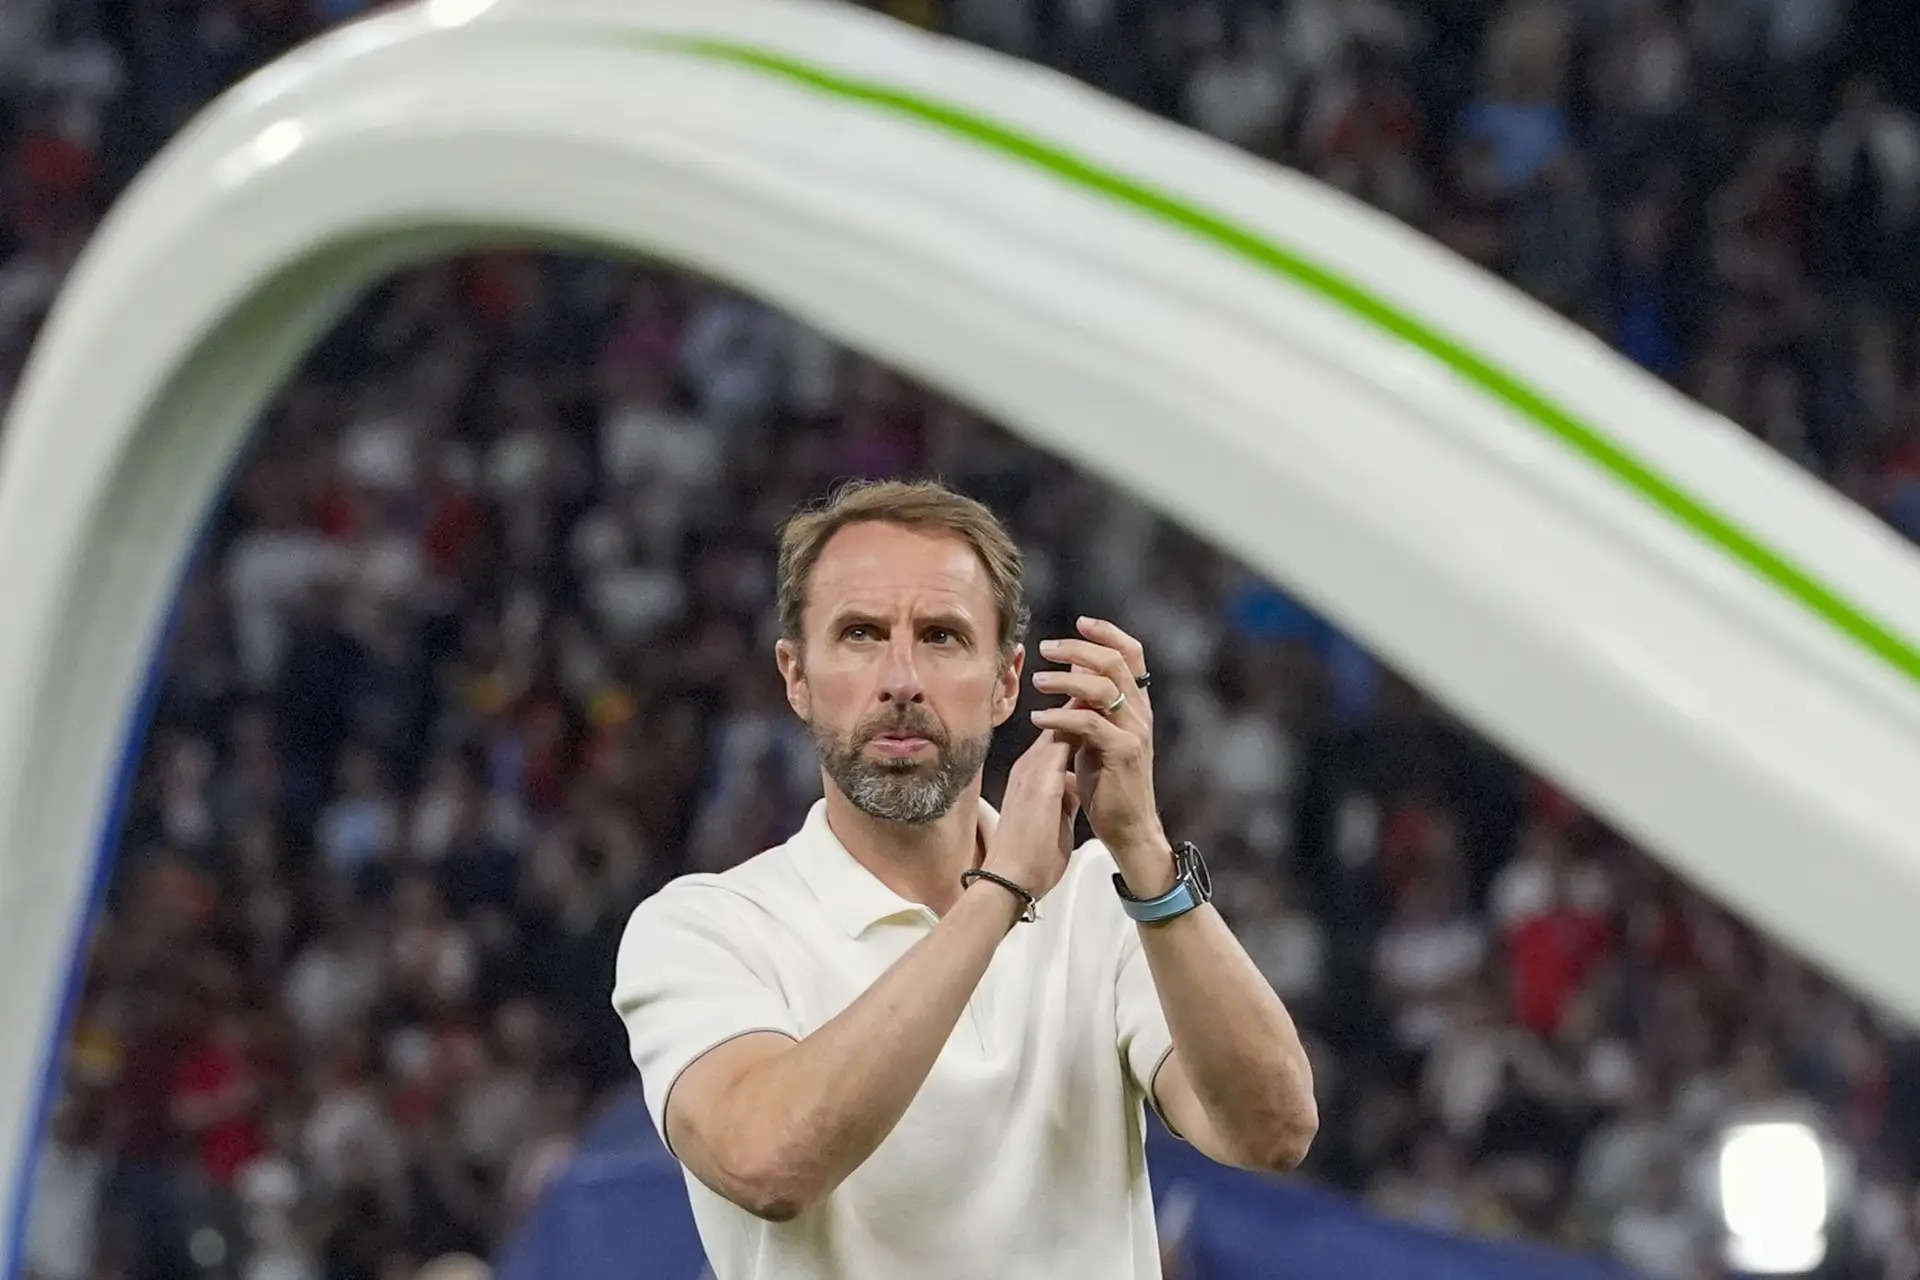 Gareth Southgate opting for a career change? Here's what we know about the former England manager's future prospects 